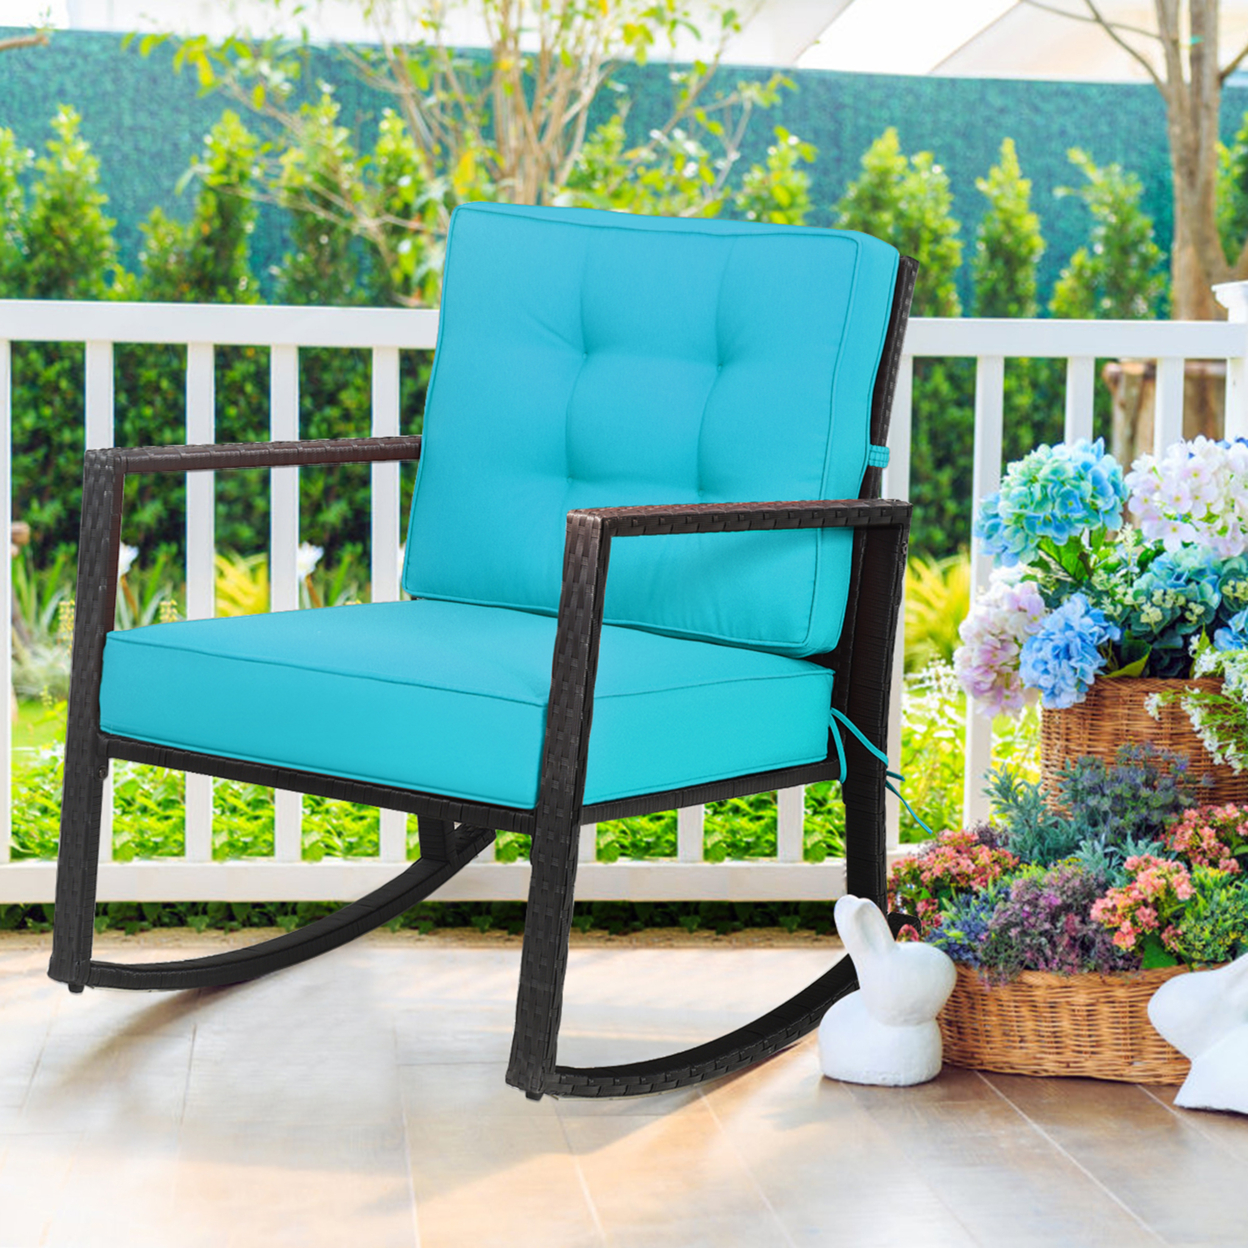 Outdoor Wicker Rocking Chair Patio Lawn Rattan Single Chair Glider W/ Turquoise Cushion